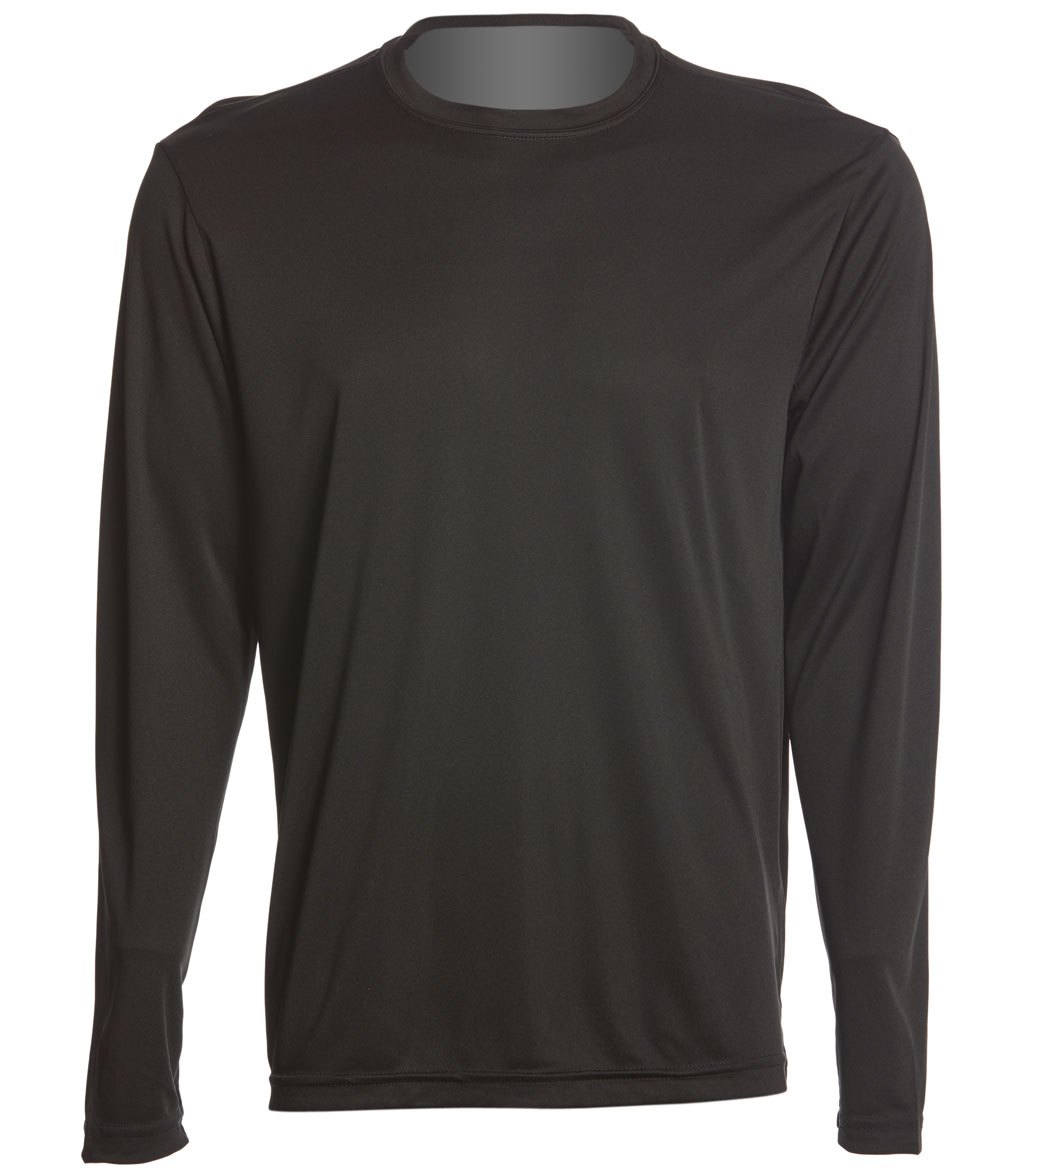 Men's Long Sleeve Posicharge Competitortm Tee Shirt - Black Large Polyester - Swimoutlet.com